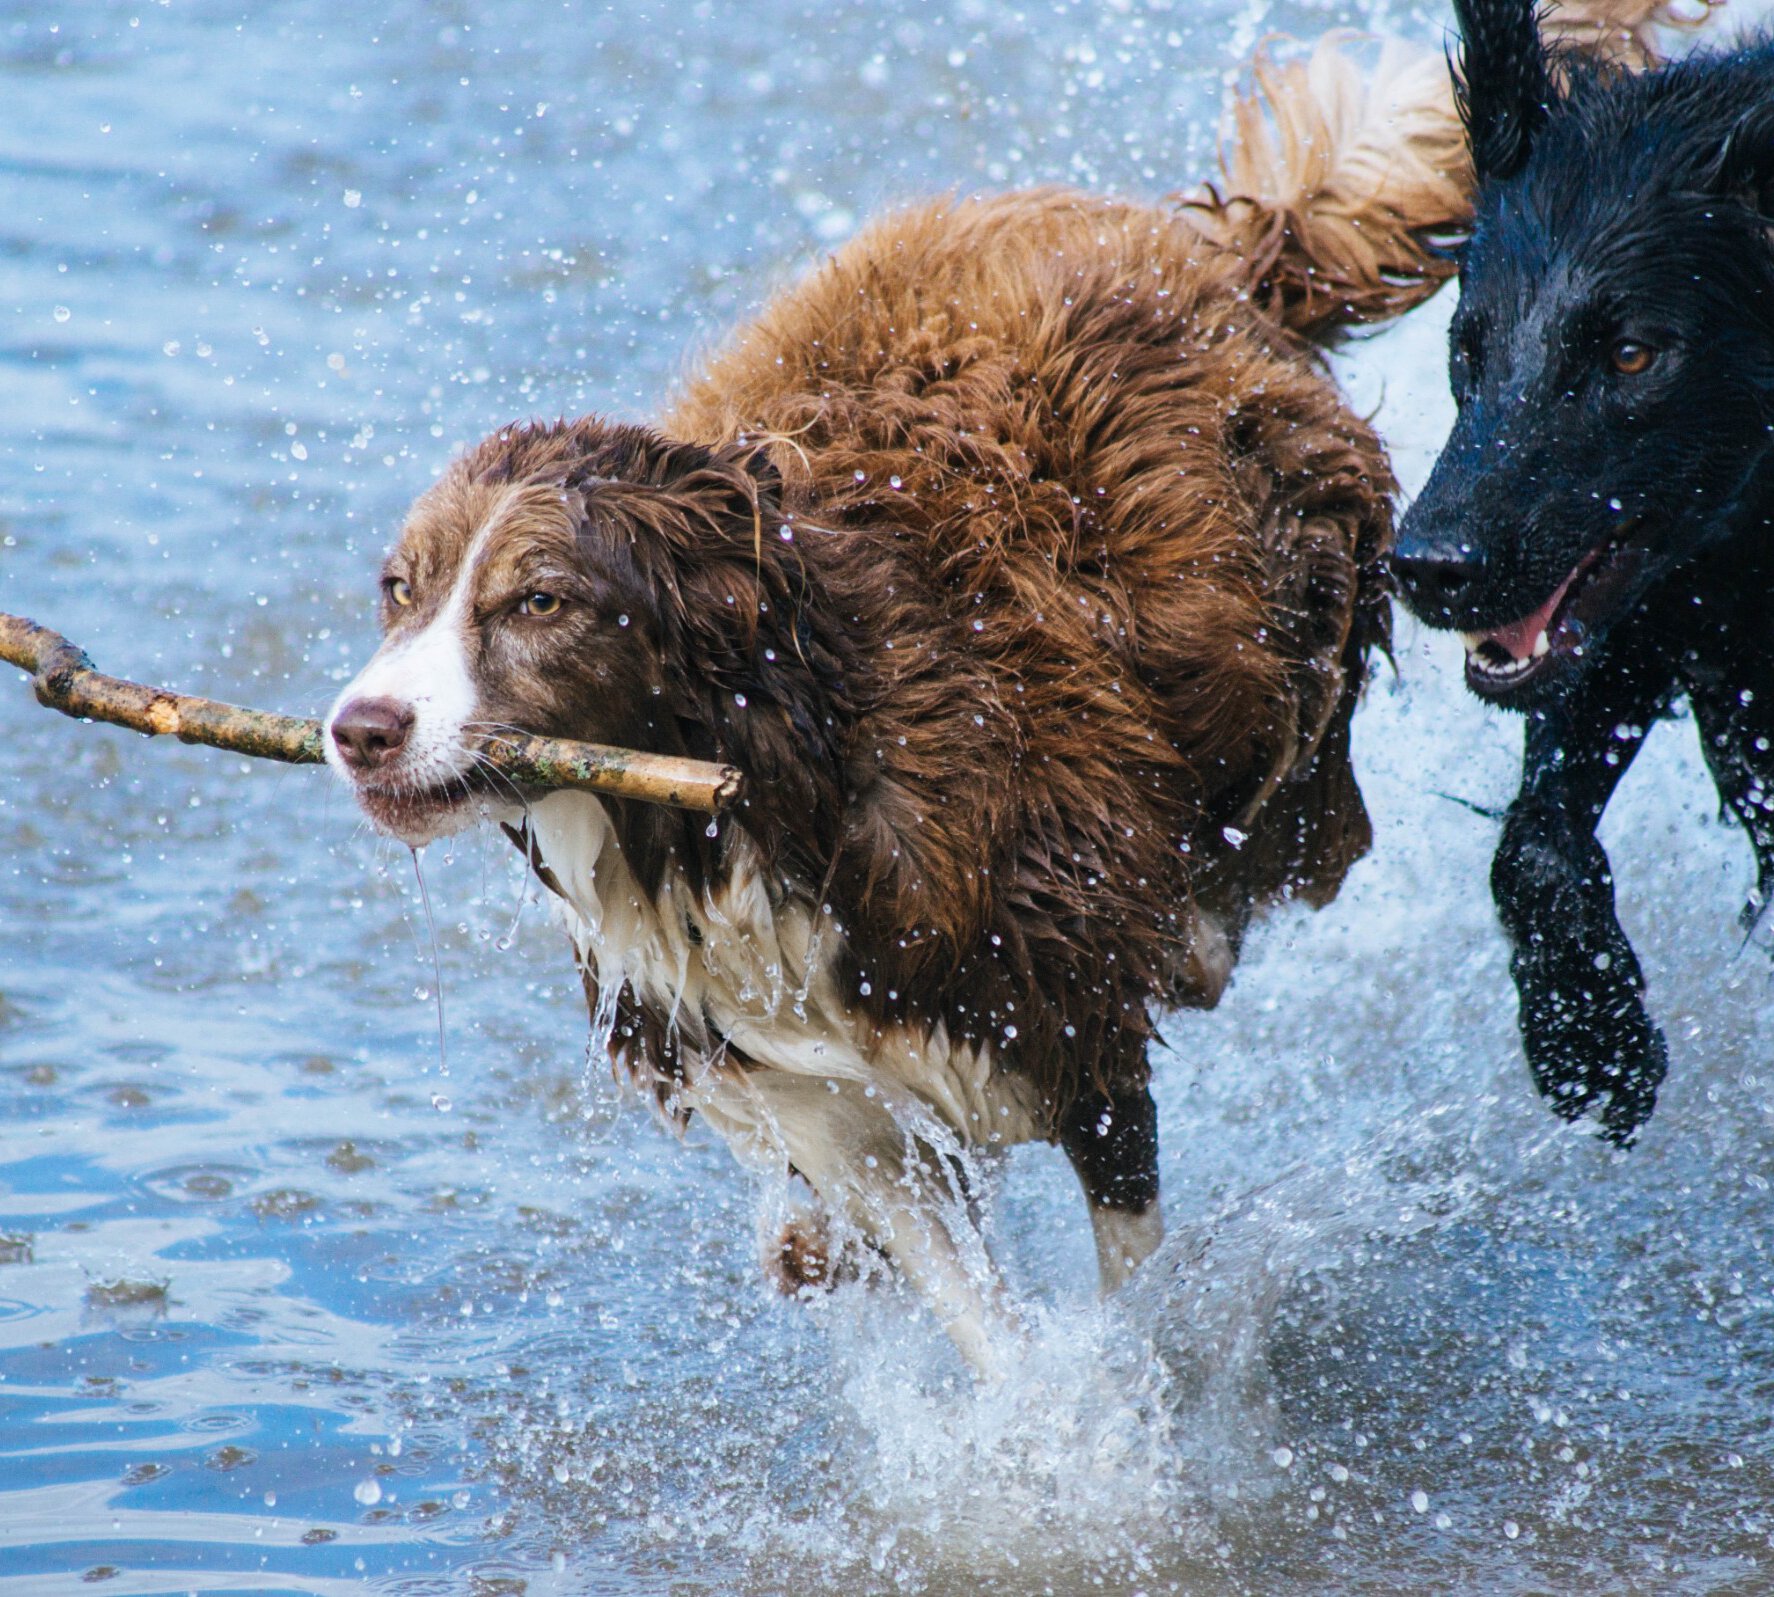 Two dogs running in water with one dog holding a stick